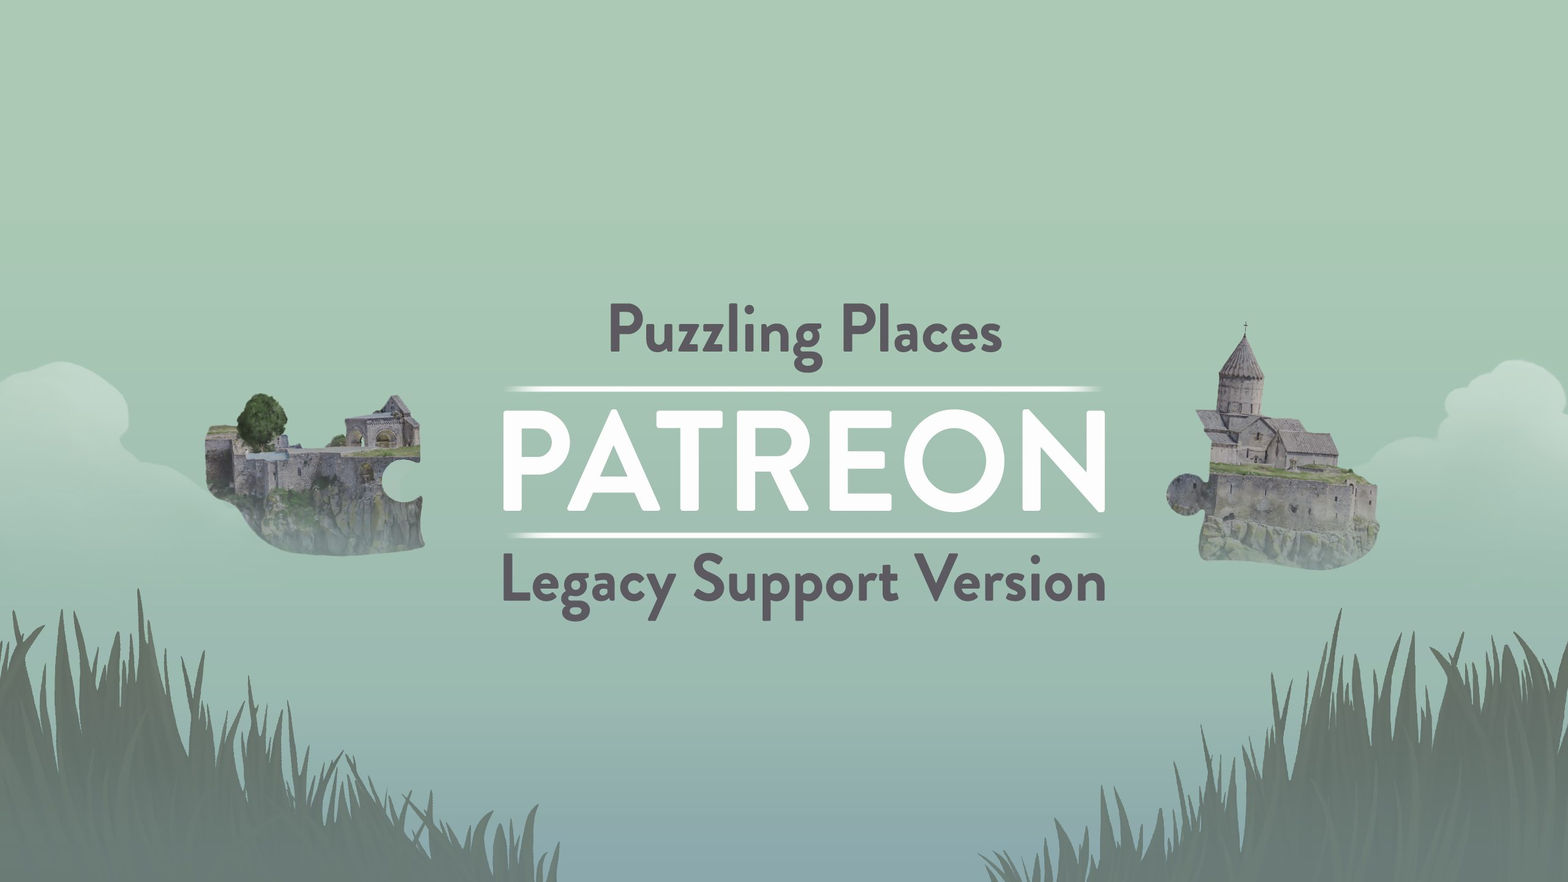 Puzzling Places - Patreon Legacy Support Version